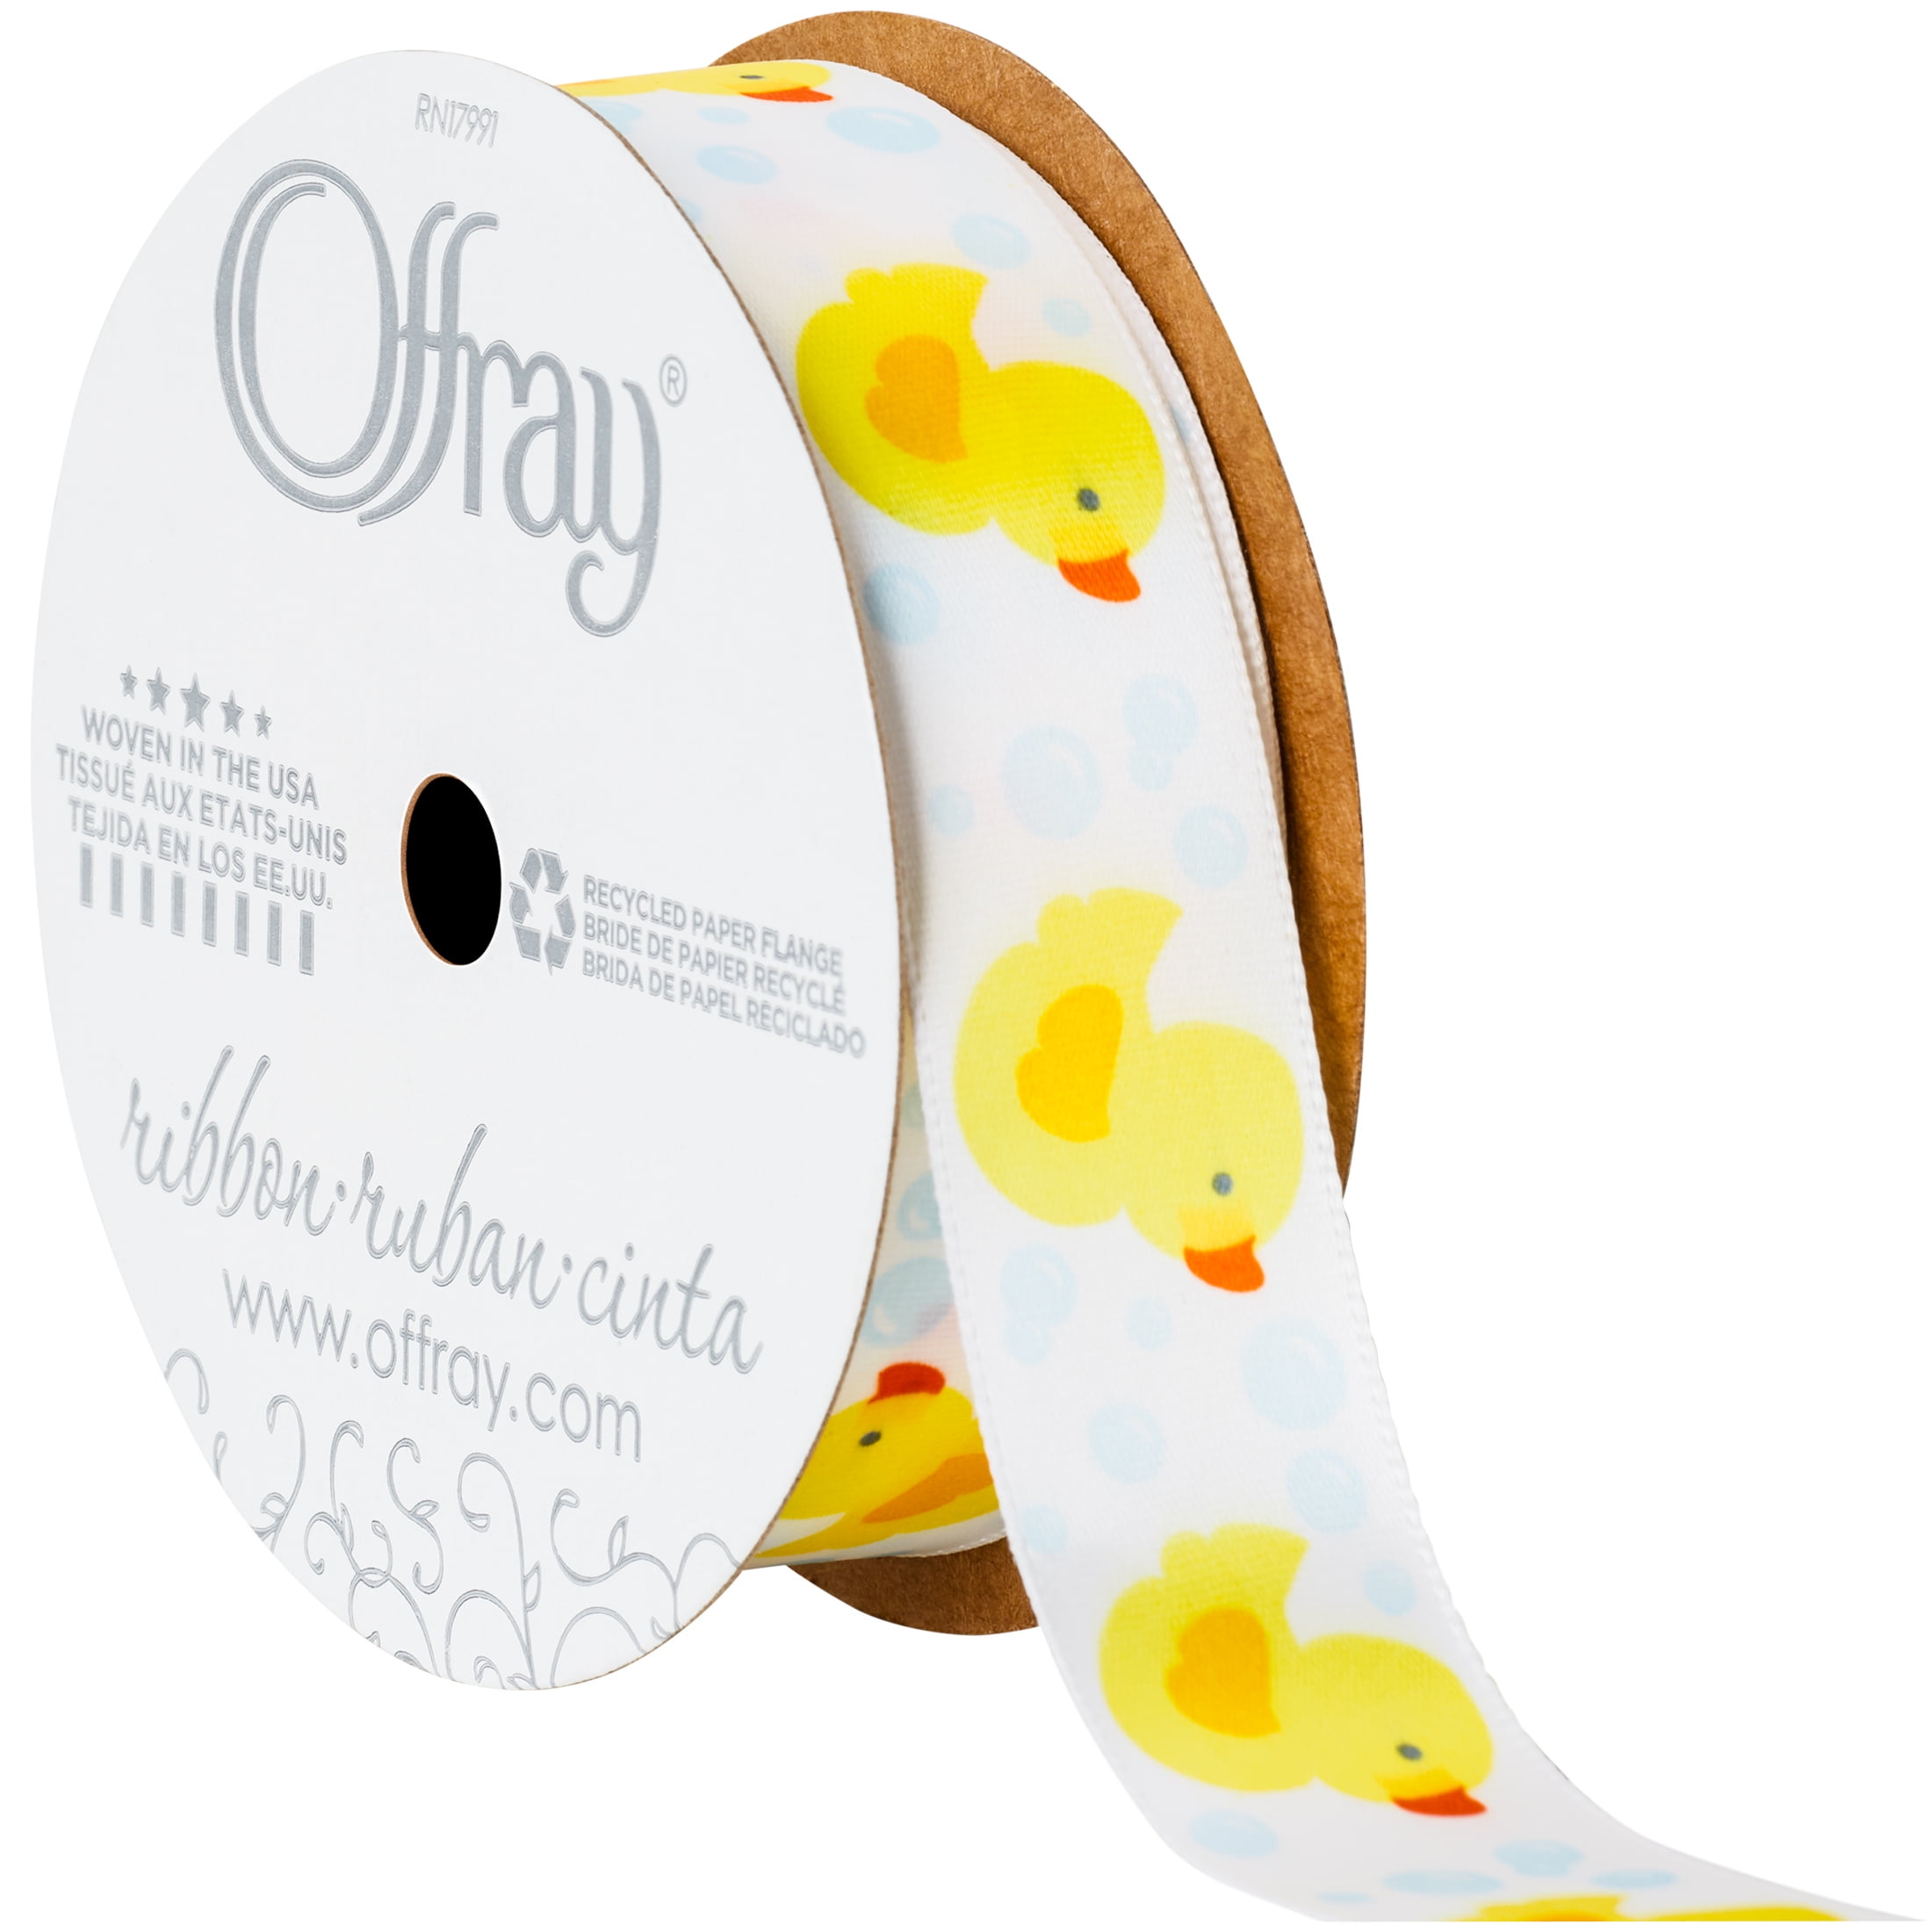 Offray Ribbon, White 7/8 inch Rubber Ducky Satin Ribbon for Sewing, Crafts, and Baby, 9 feet, 1 Each